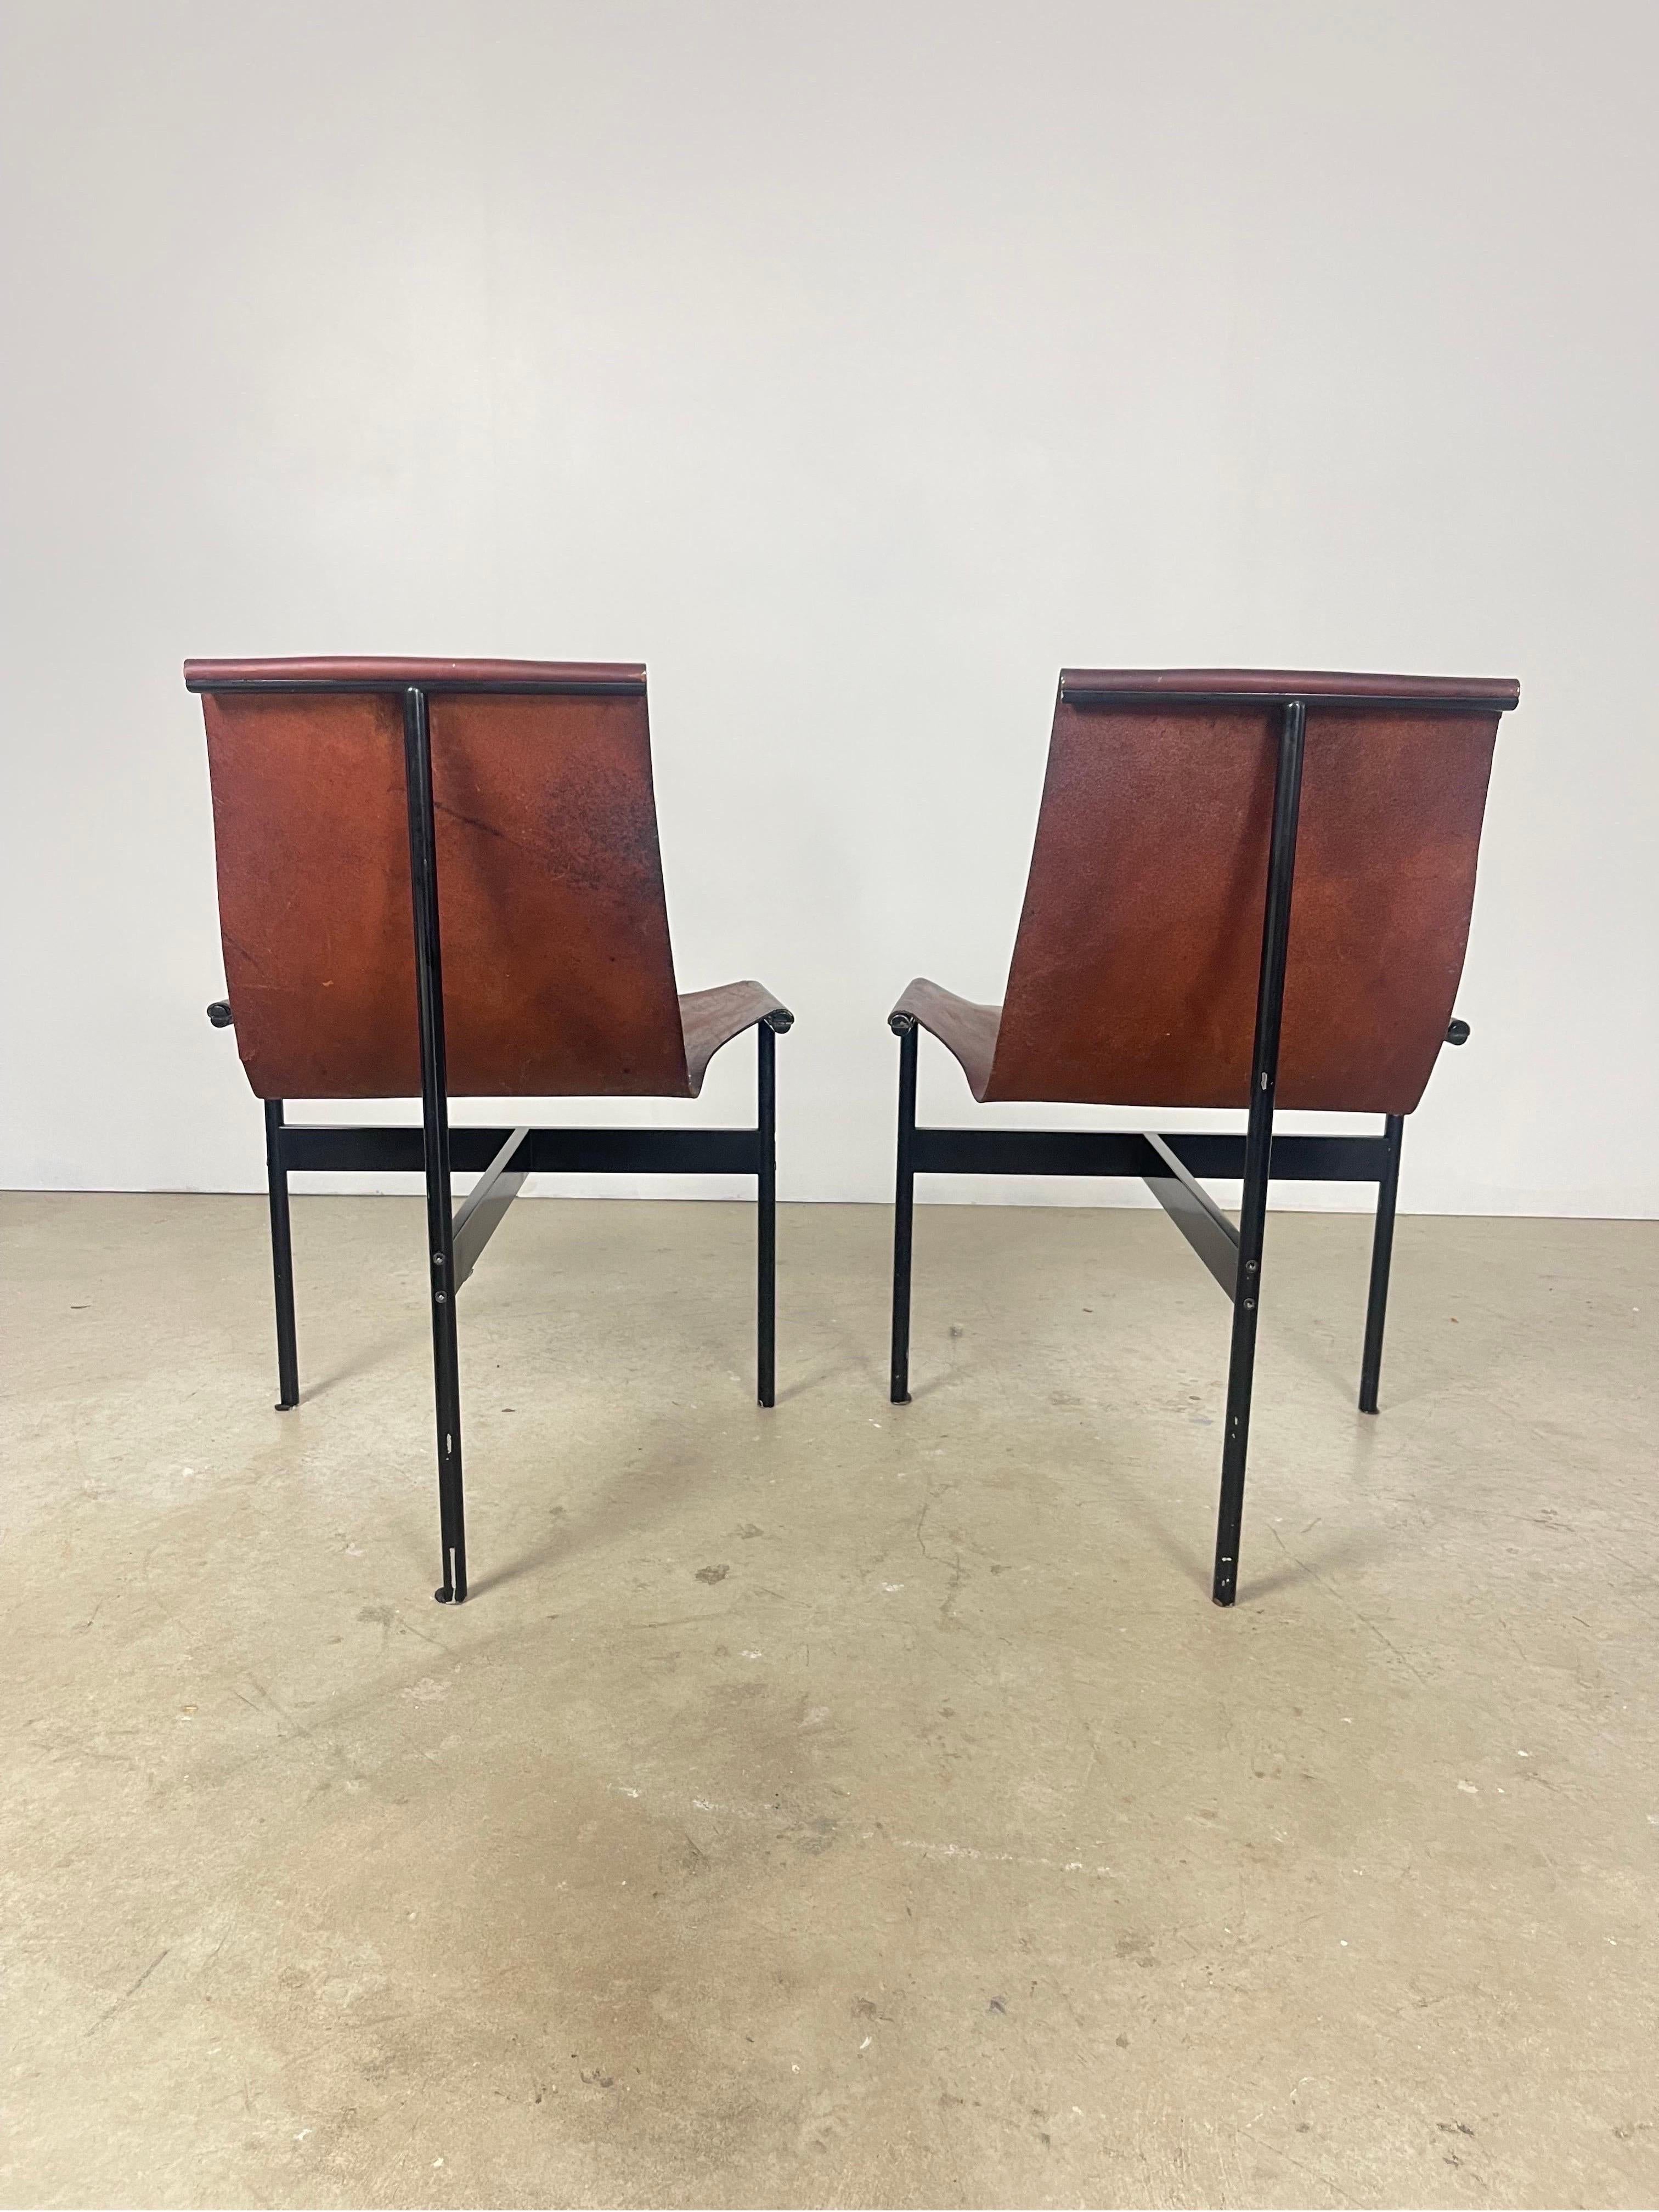 Pair of T Side Chairs by Katavalos, Littell, and Kelly for Laverne International 1